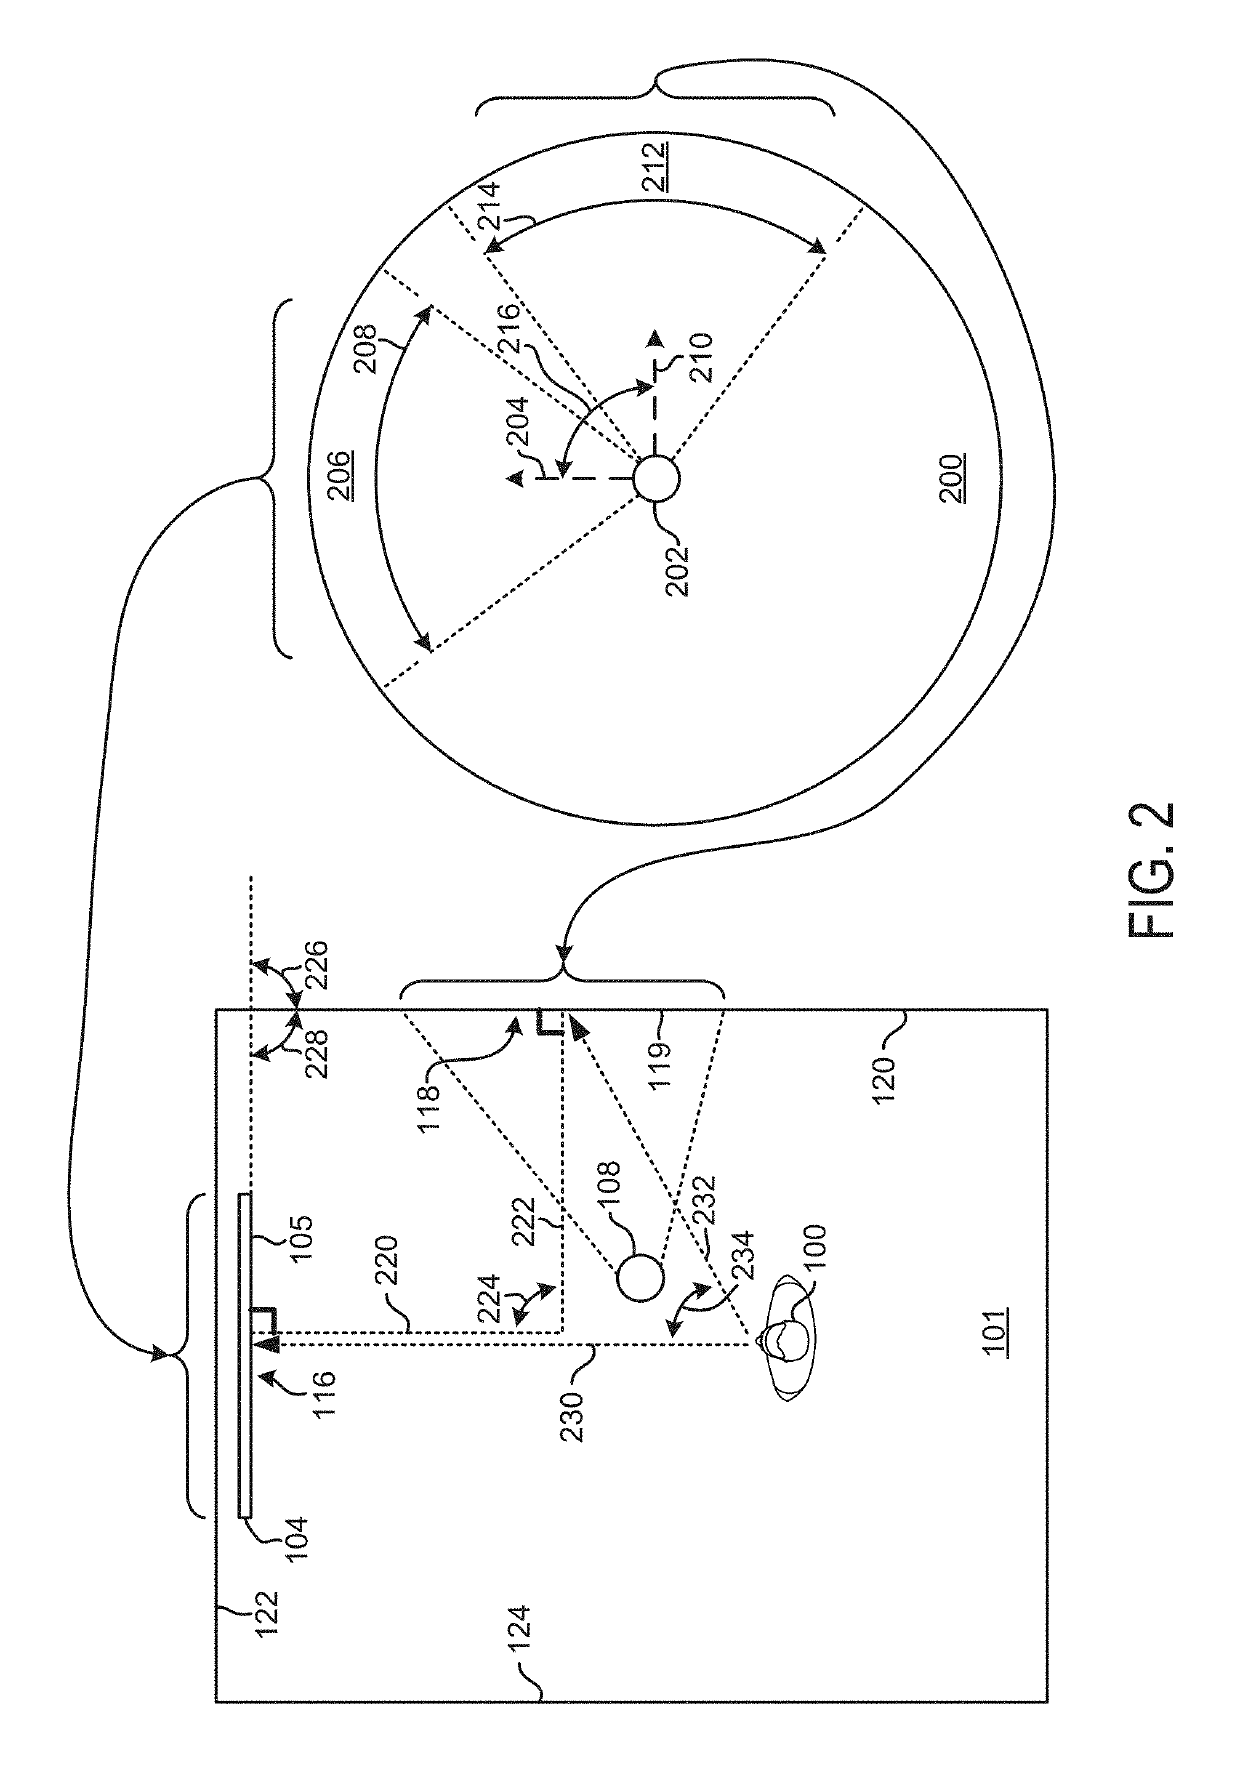 Spatially and user aware second screen projection from a companion robot or device